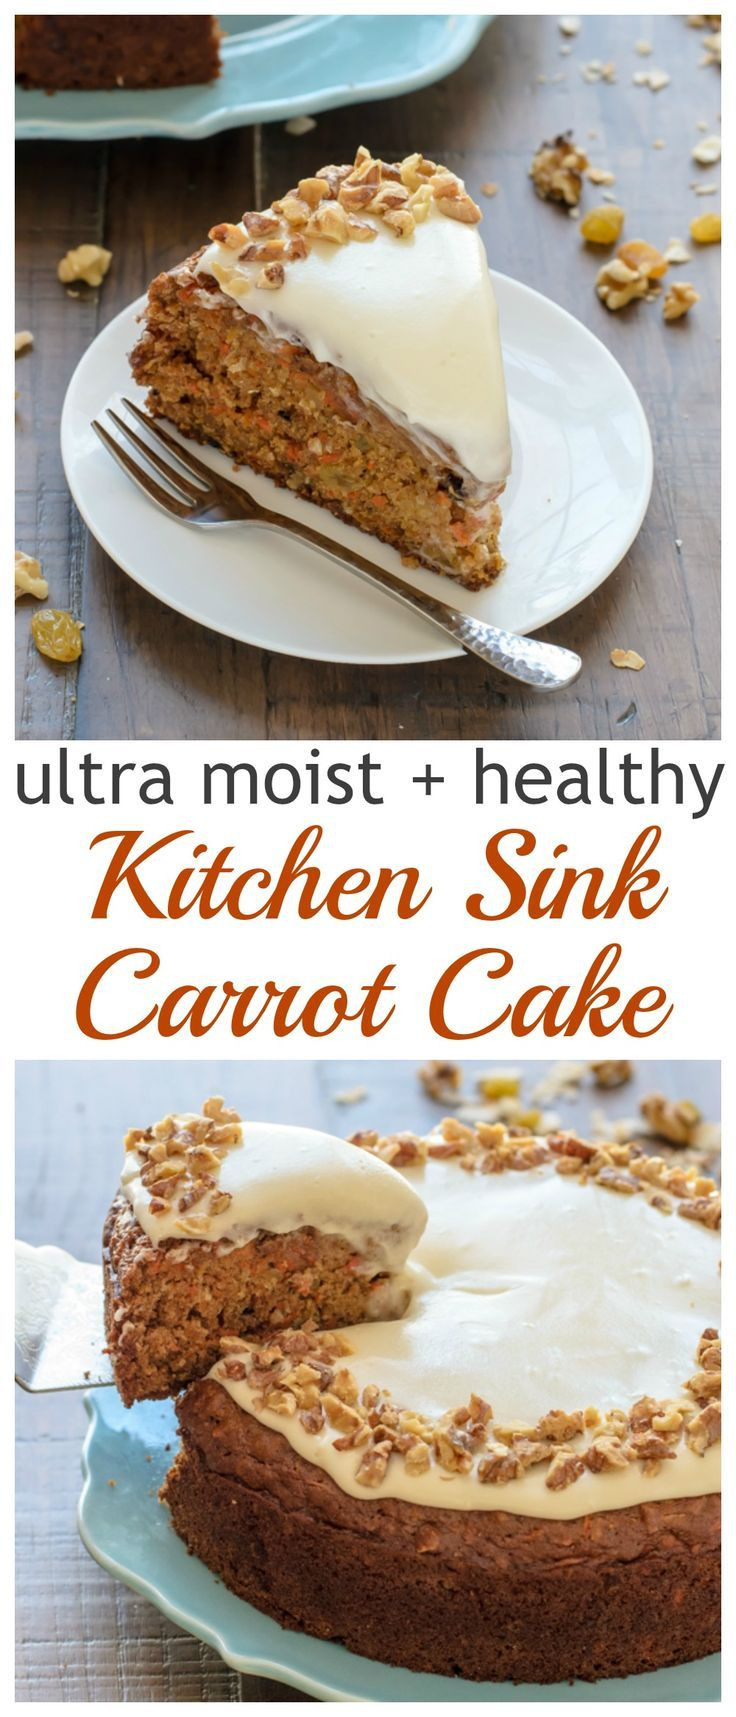 Healthy Carrot Recipes
 Healthy Carrot Cake with Light Cream Cheese Frosting